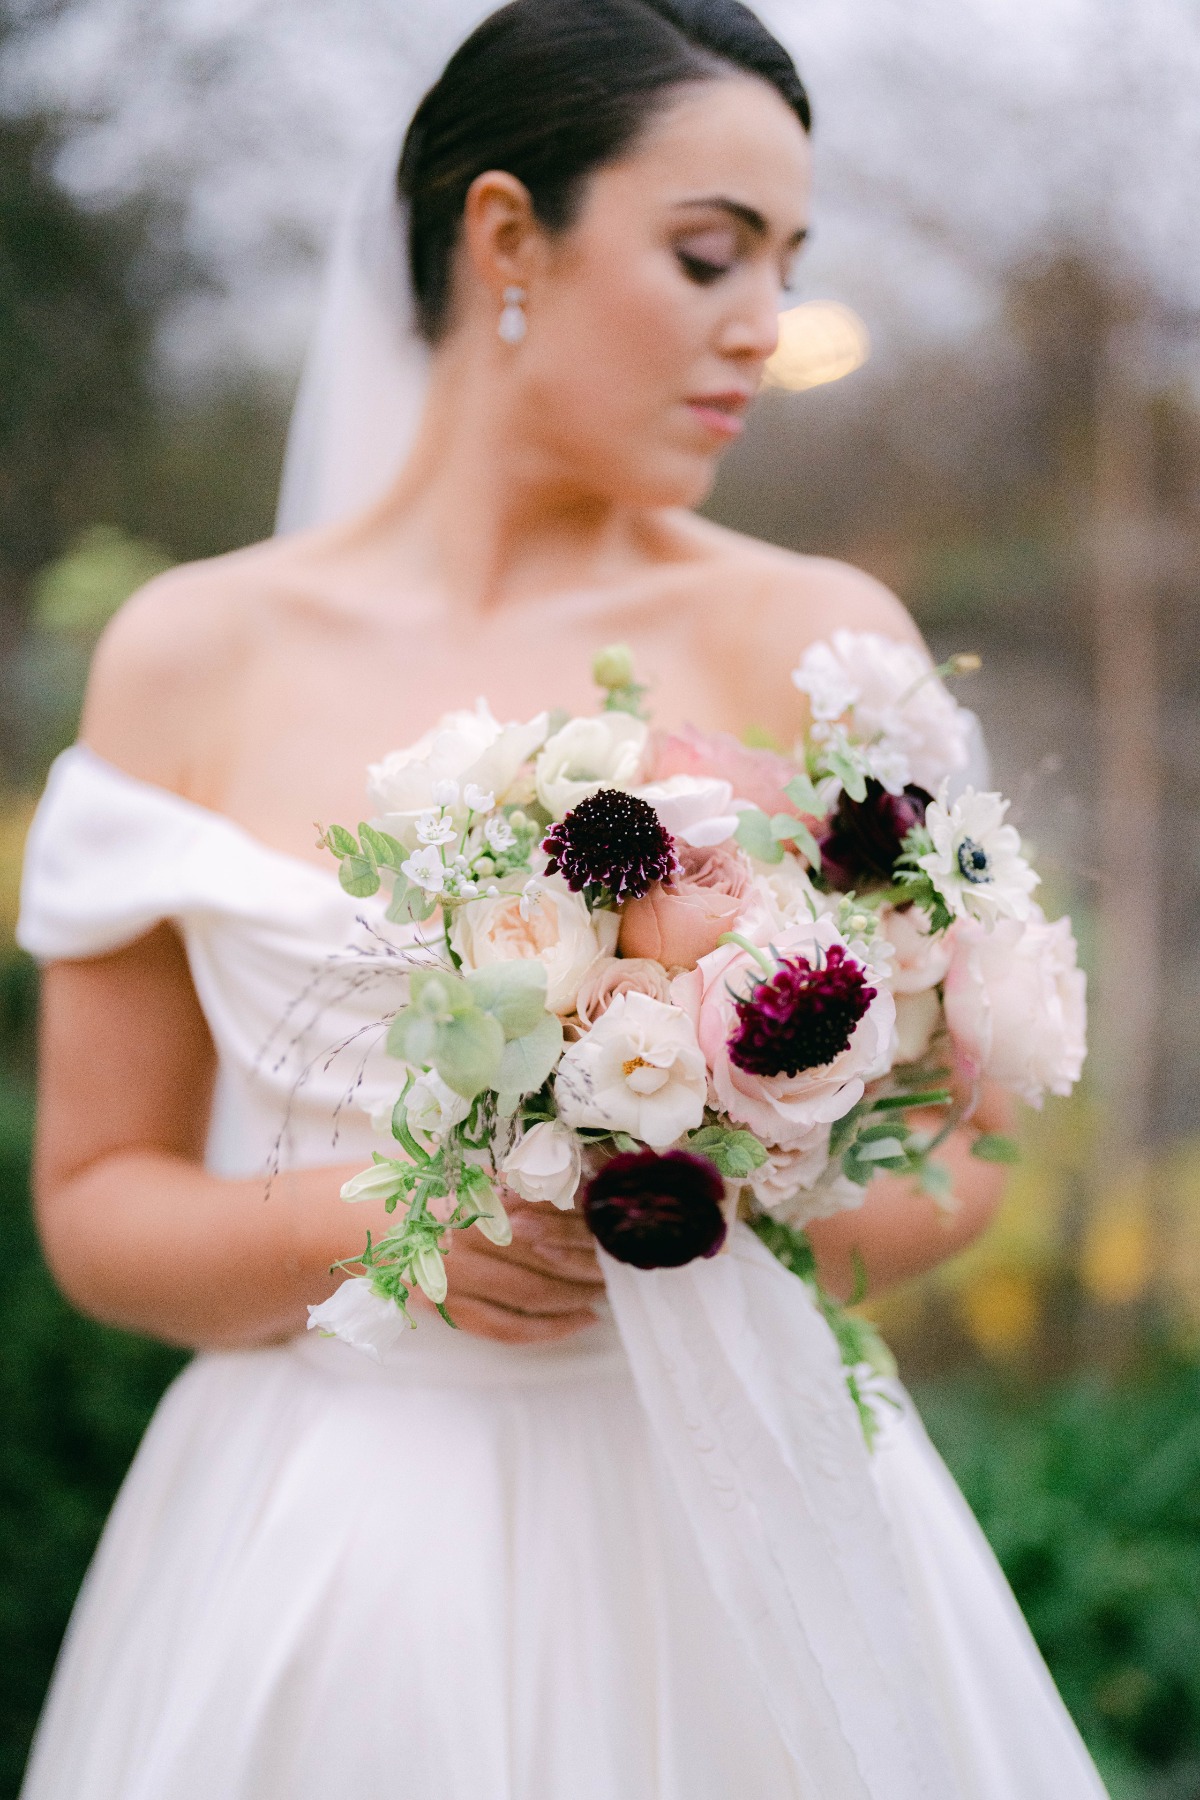 Bouquets with pops of maroon